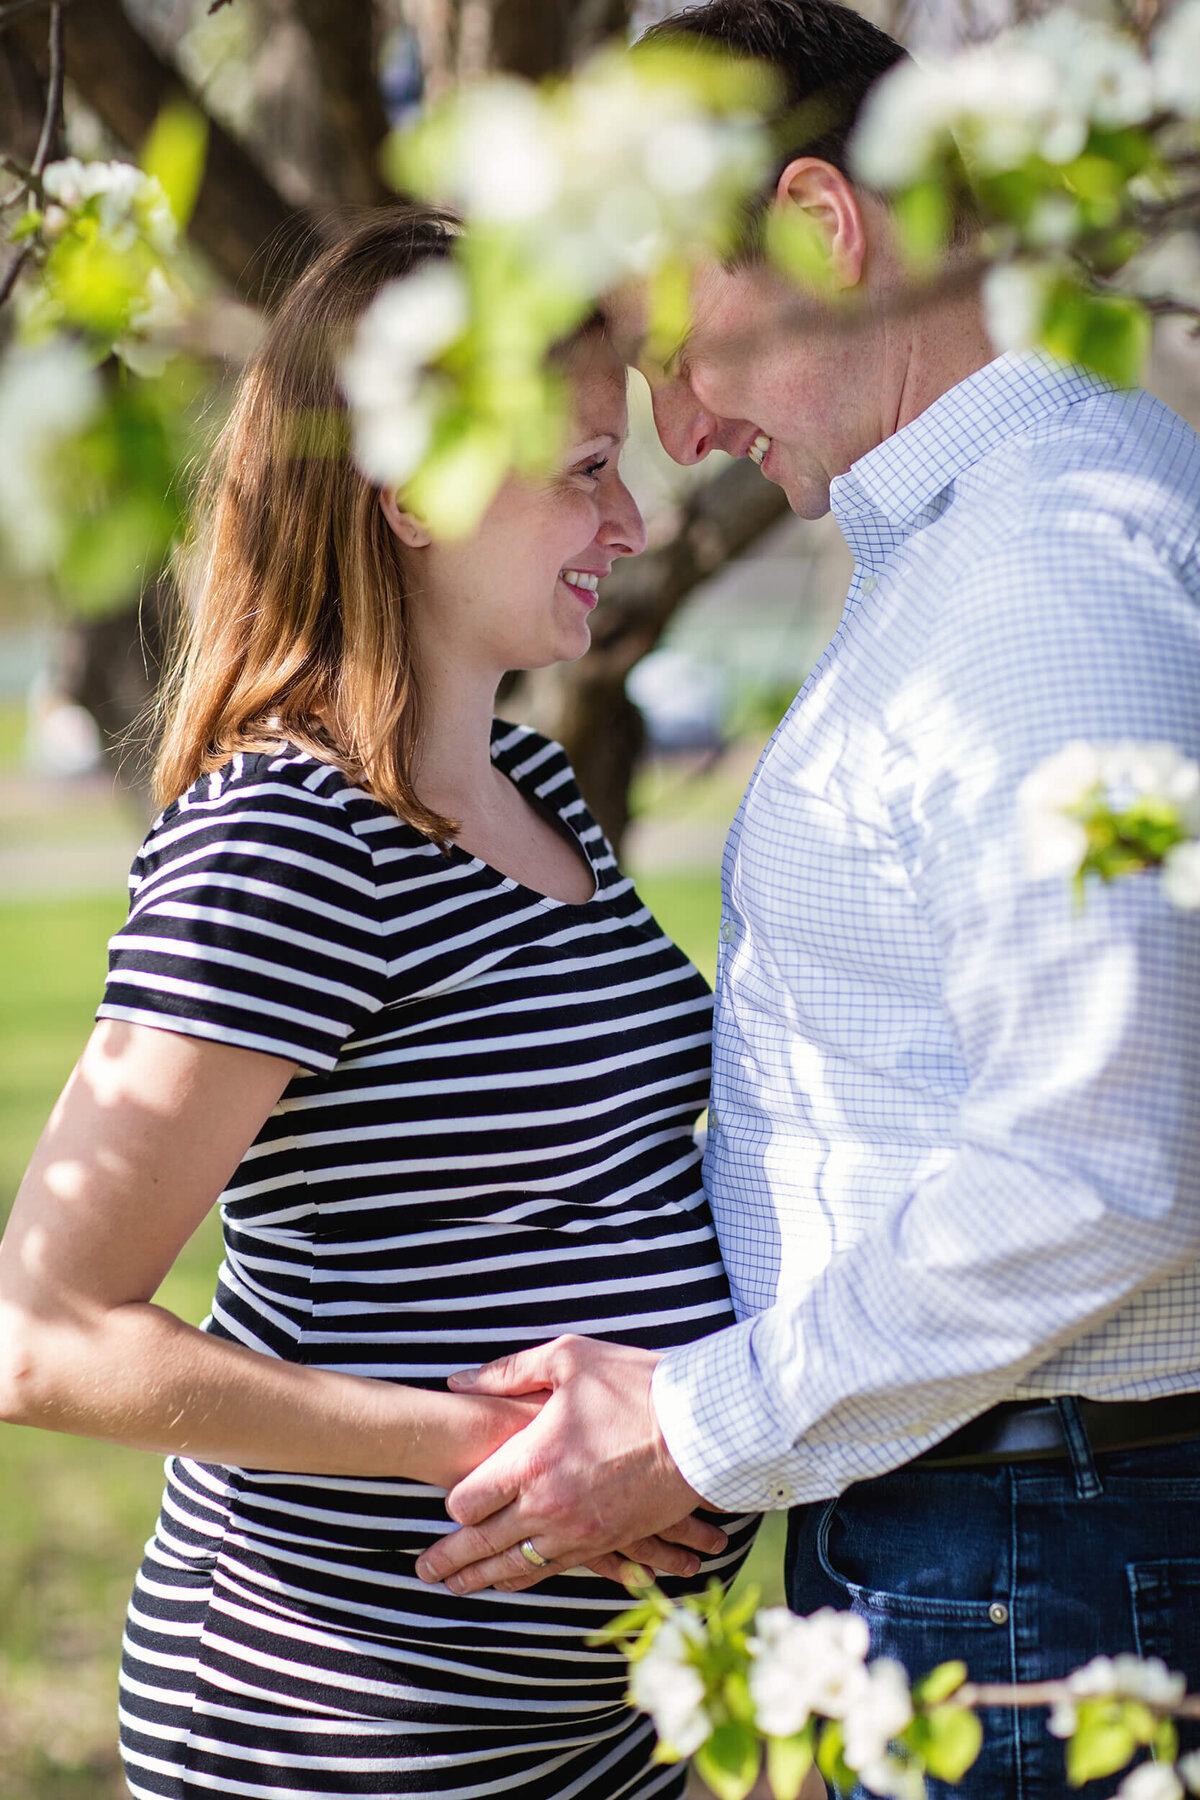 Spring Bloom Maternity Photography I Megan Norman Photography